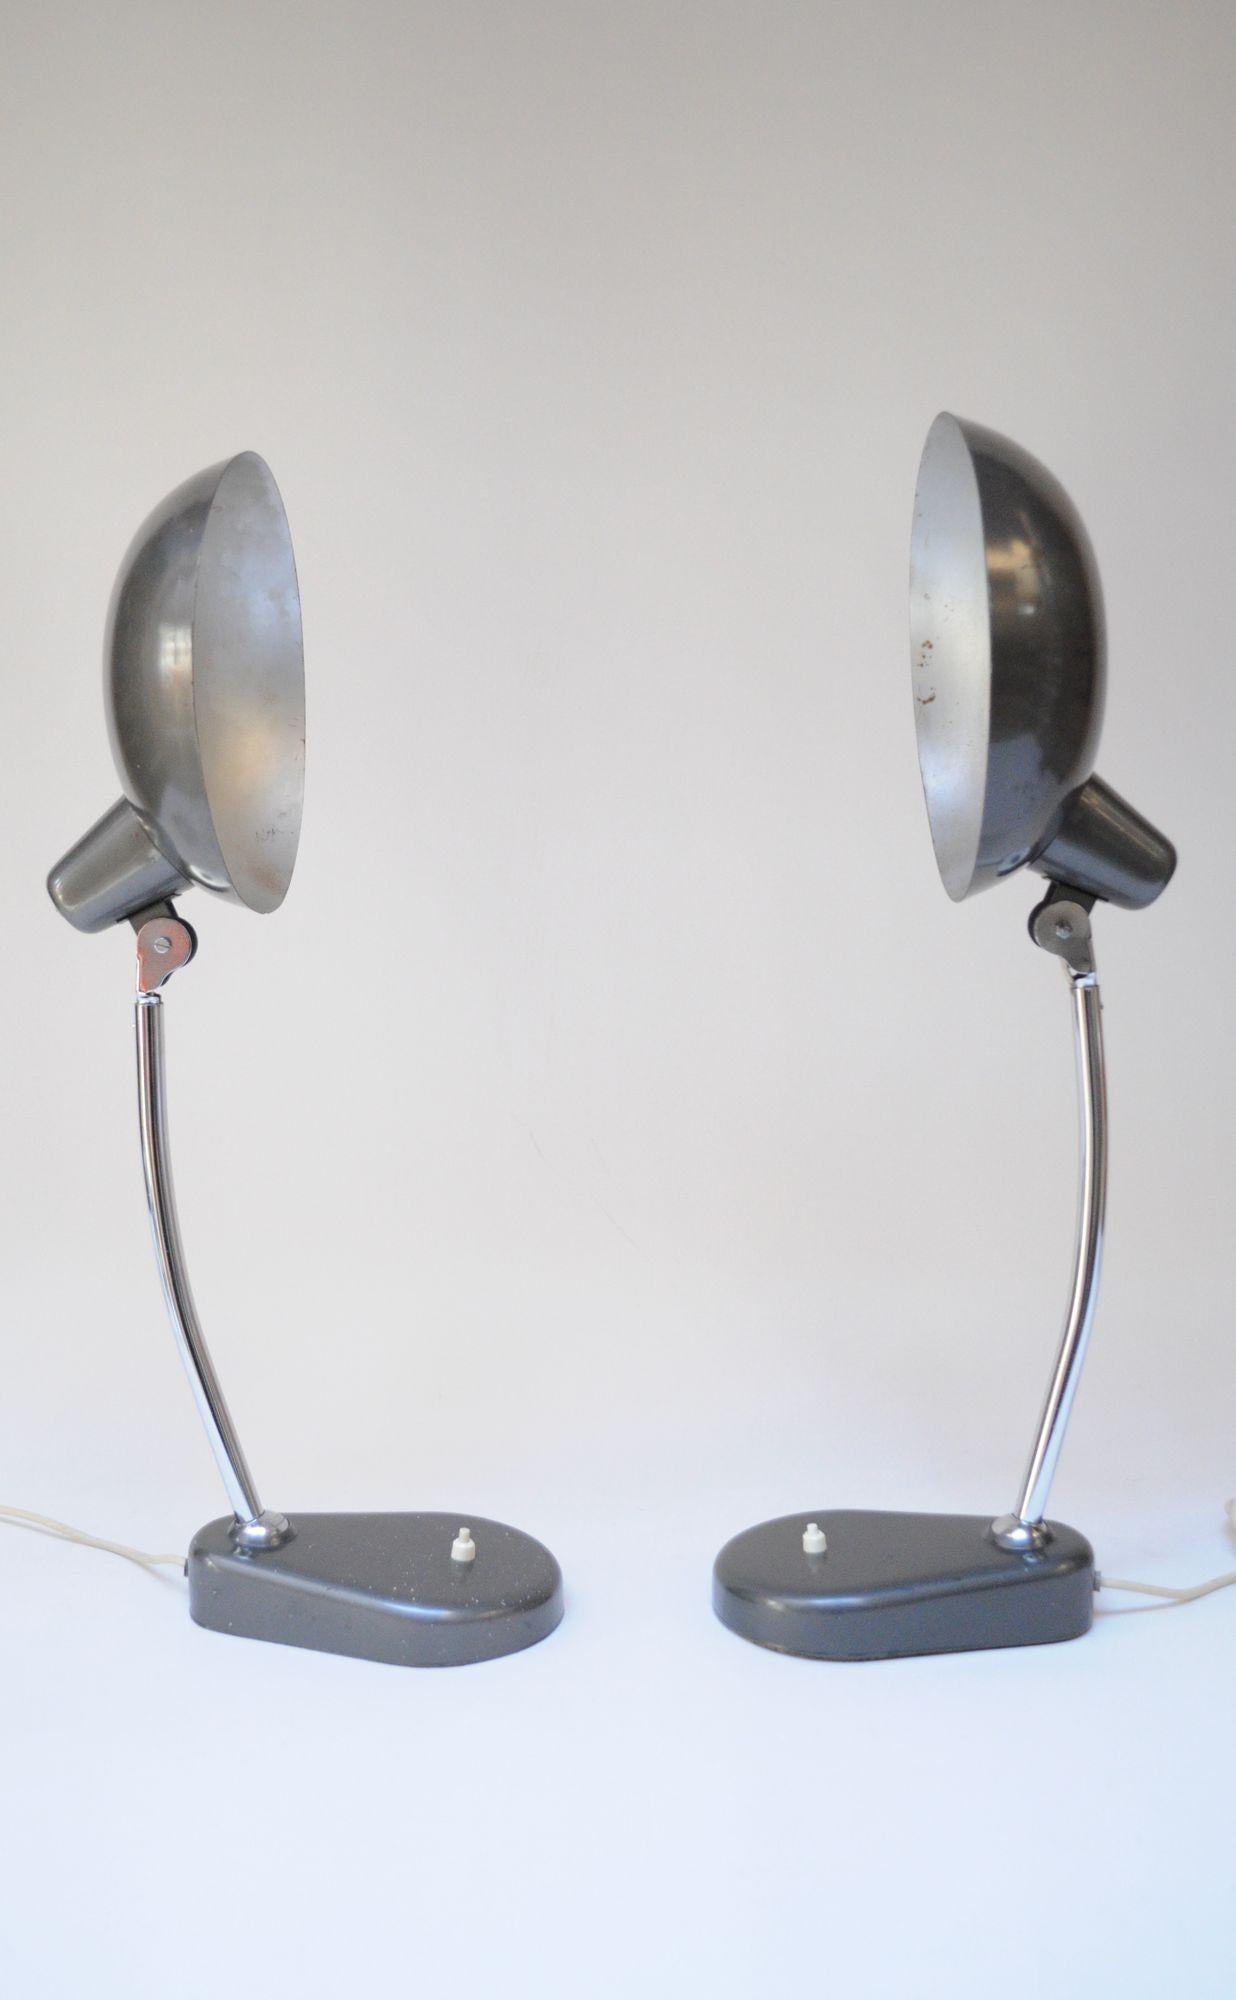 Pair of Vintage Italian Modern Industrial Chromed-Metal Task Lamps by Seminara In Distressed Condition For Sale In Brooklyn, NY